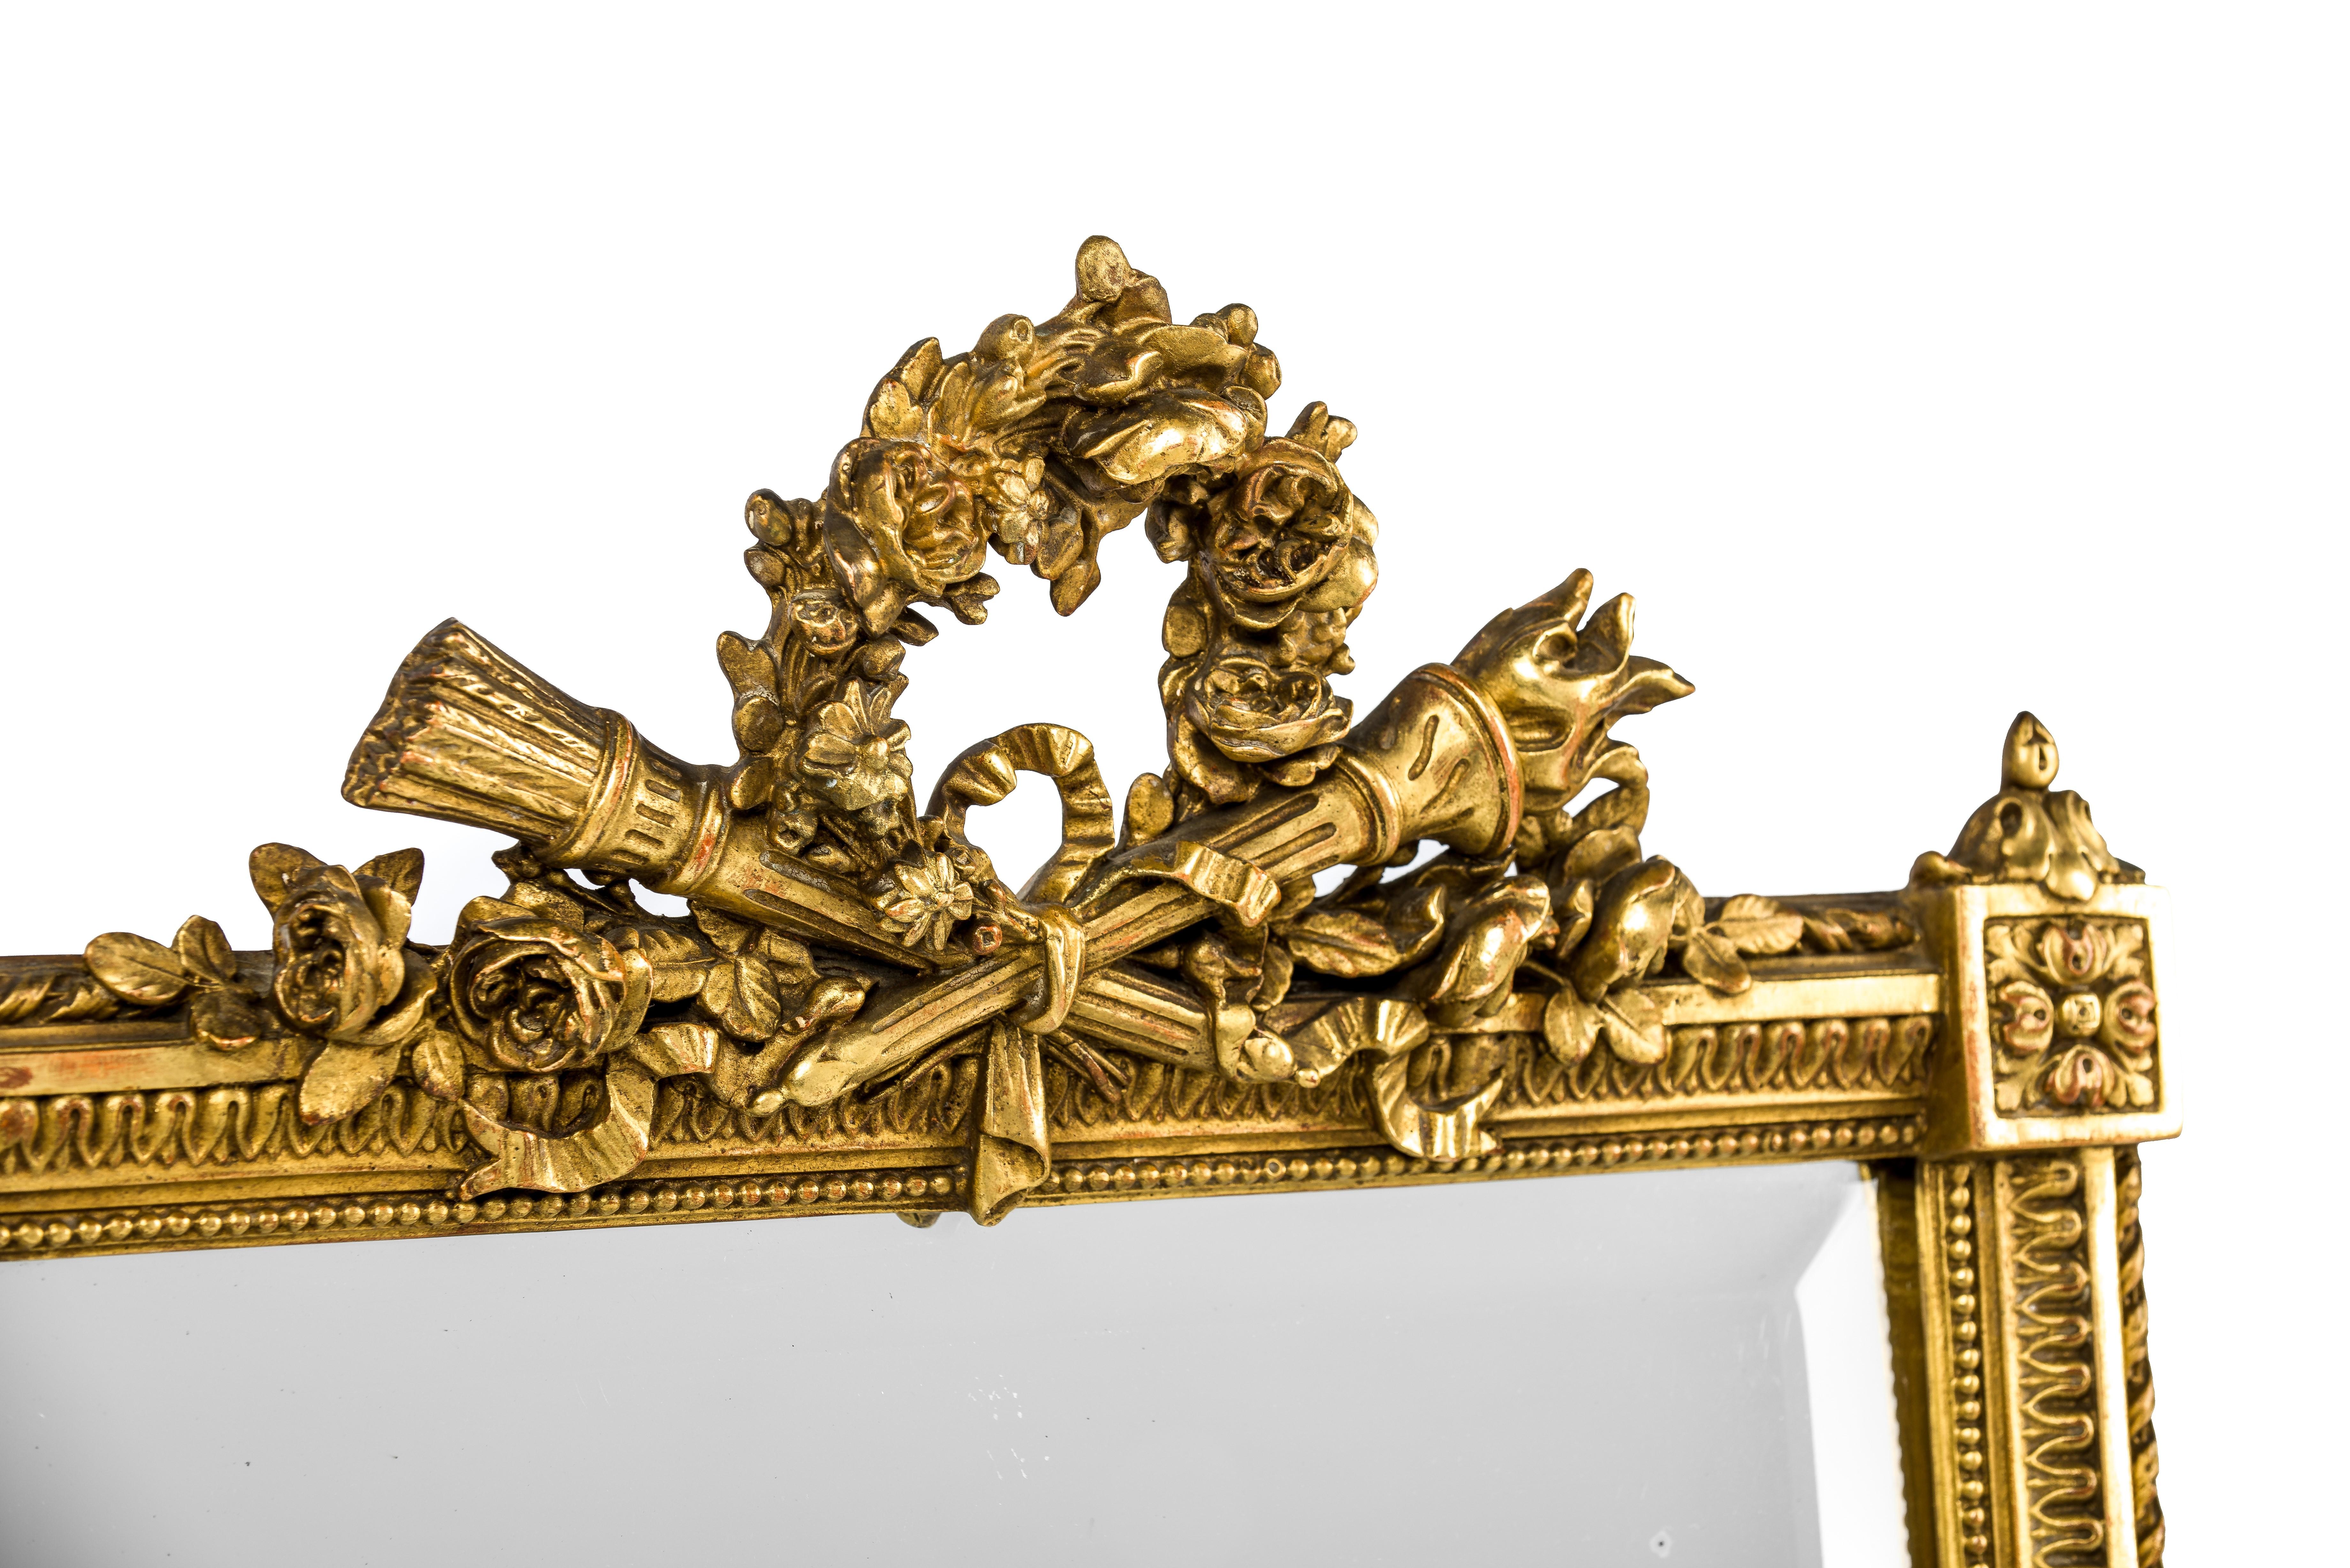 A beautiful French Louis XVI or Louis Seize mirror was made in central France around 1870. The square mirror frame and the detailed ornamentation are typical for this period and style. The mirror frame was adorned with an elaborate crest on top that